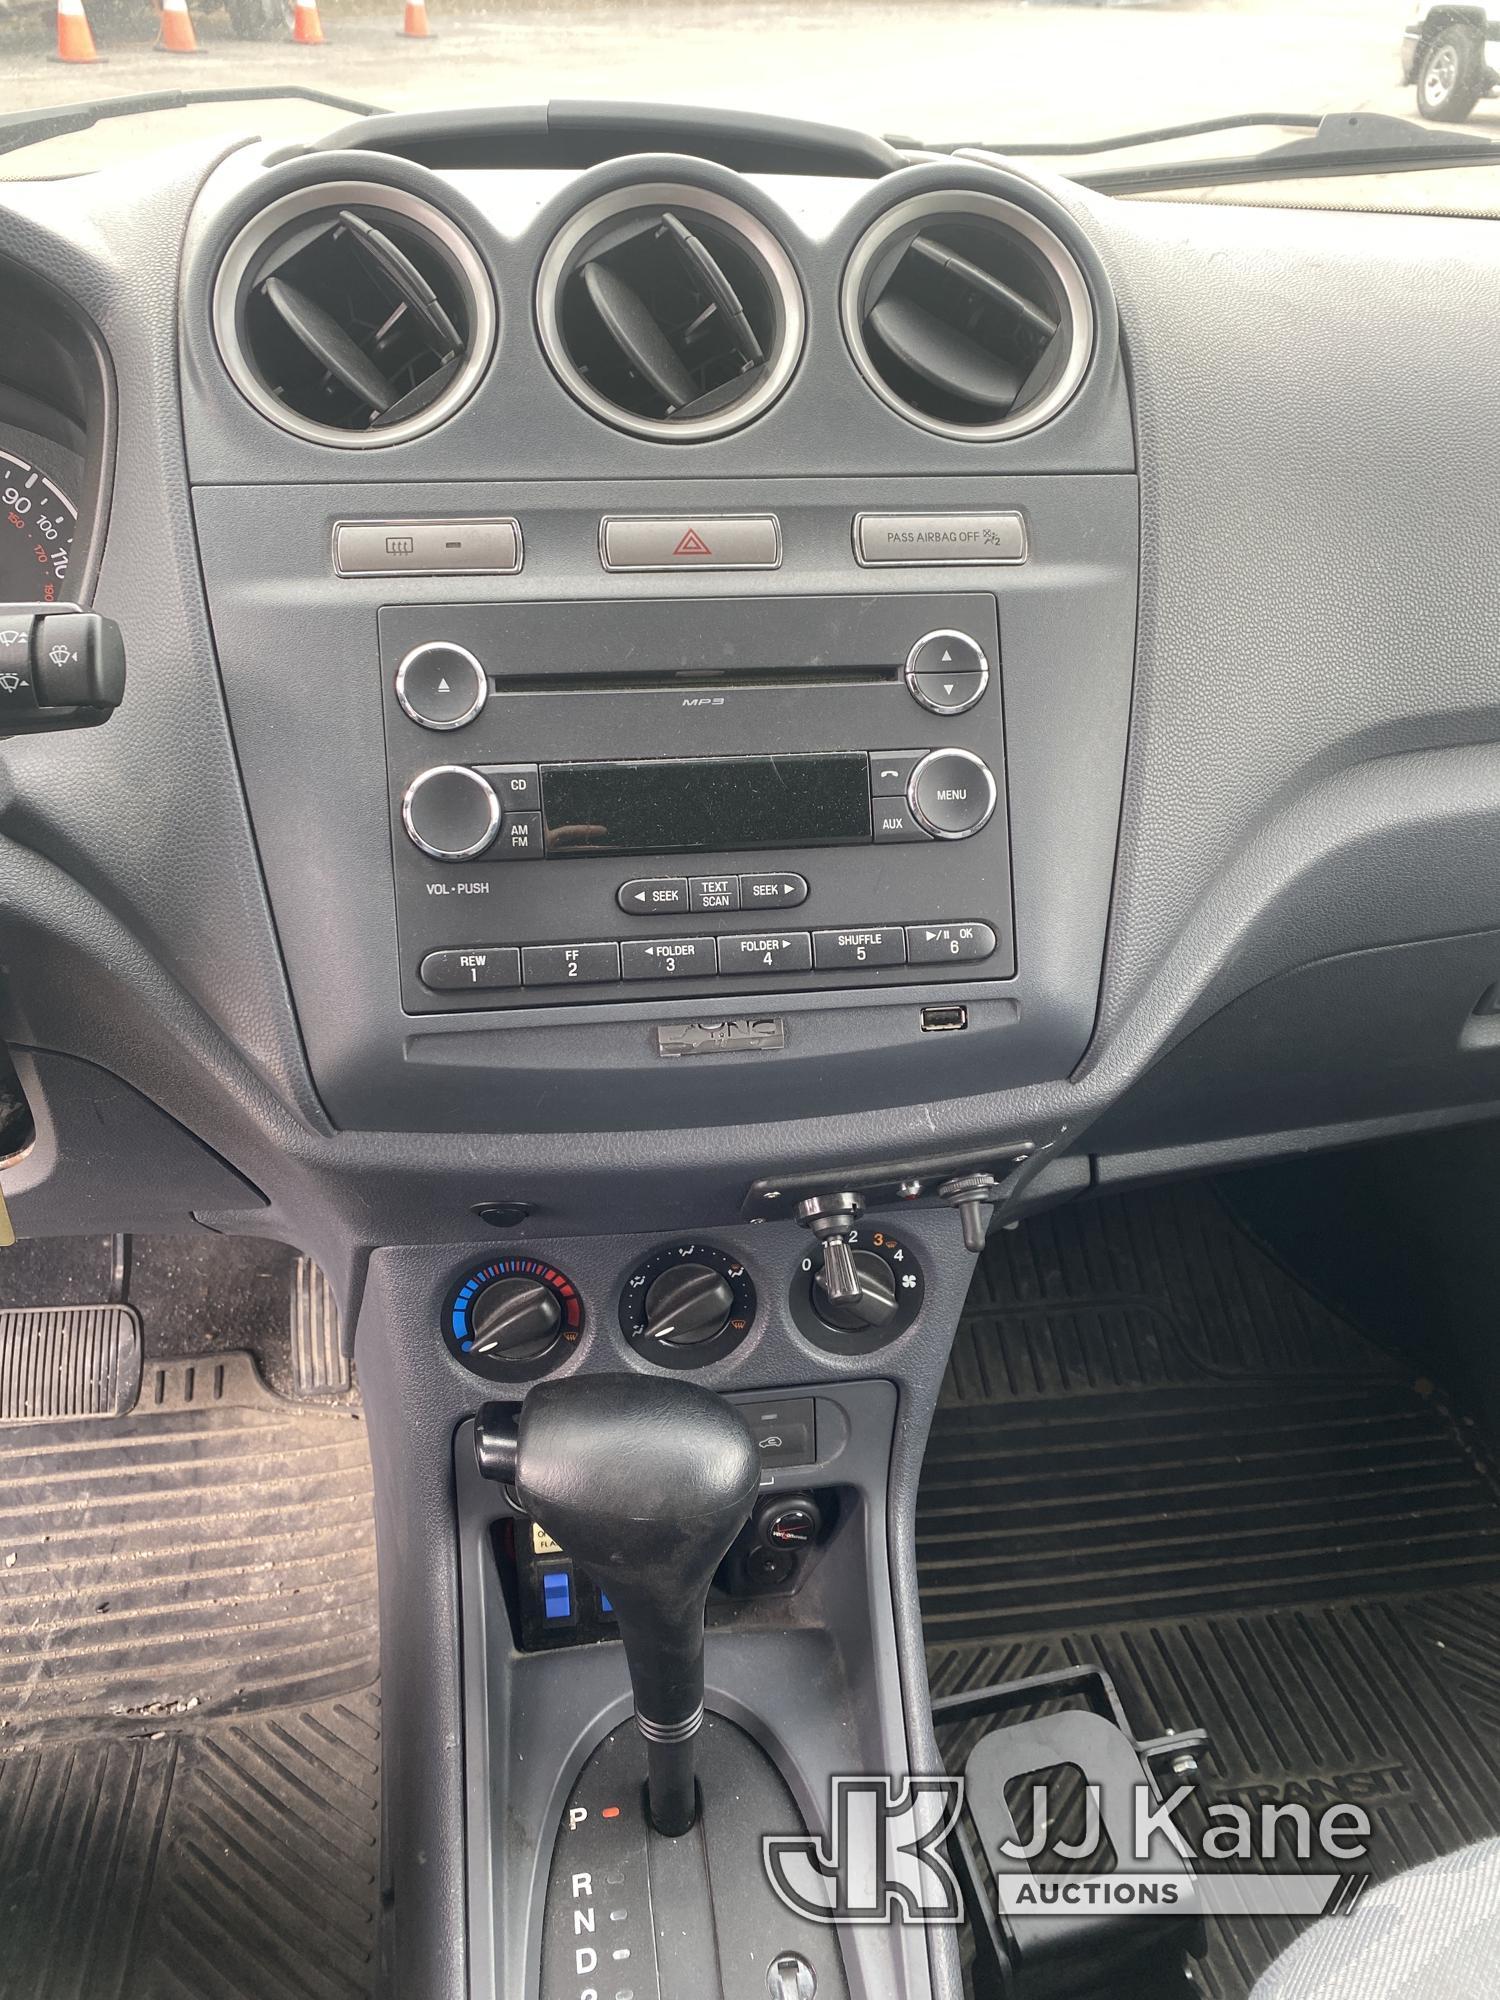 (South Beloit, IL) 2012 Ford Transit Connect Mini Cargo Van Not Running, No Crank, Condition Unknown